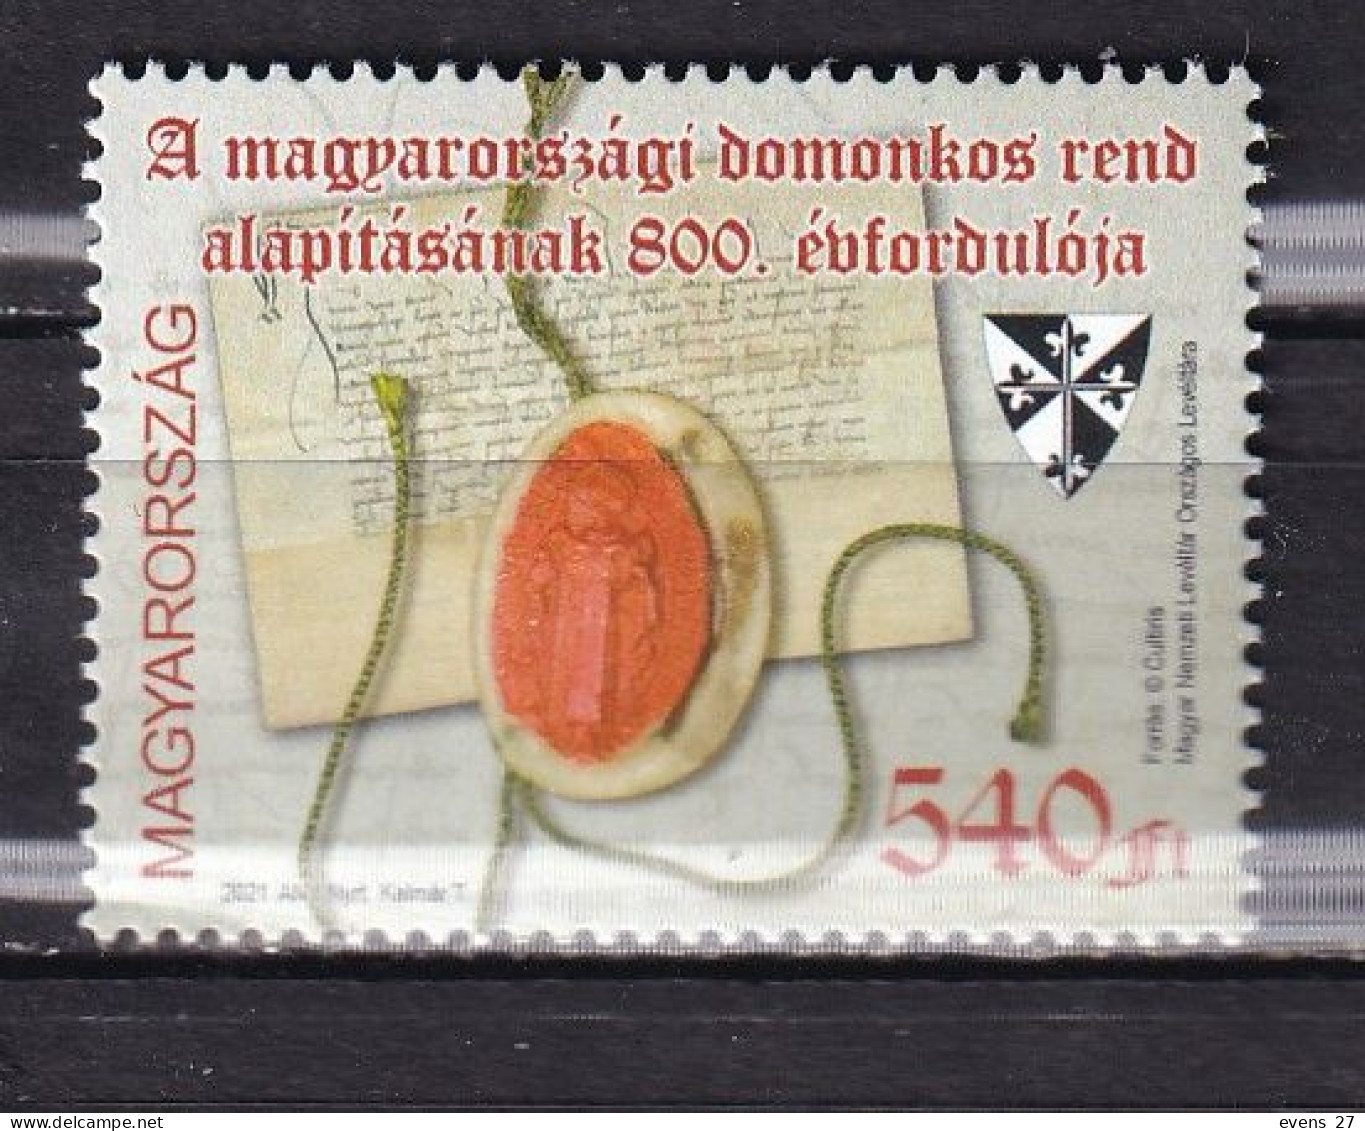 HUNGARY-2021- DOMINICAN ORDER-MNH. - Unused Stamps